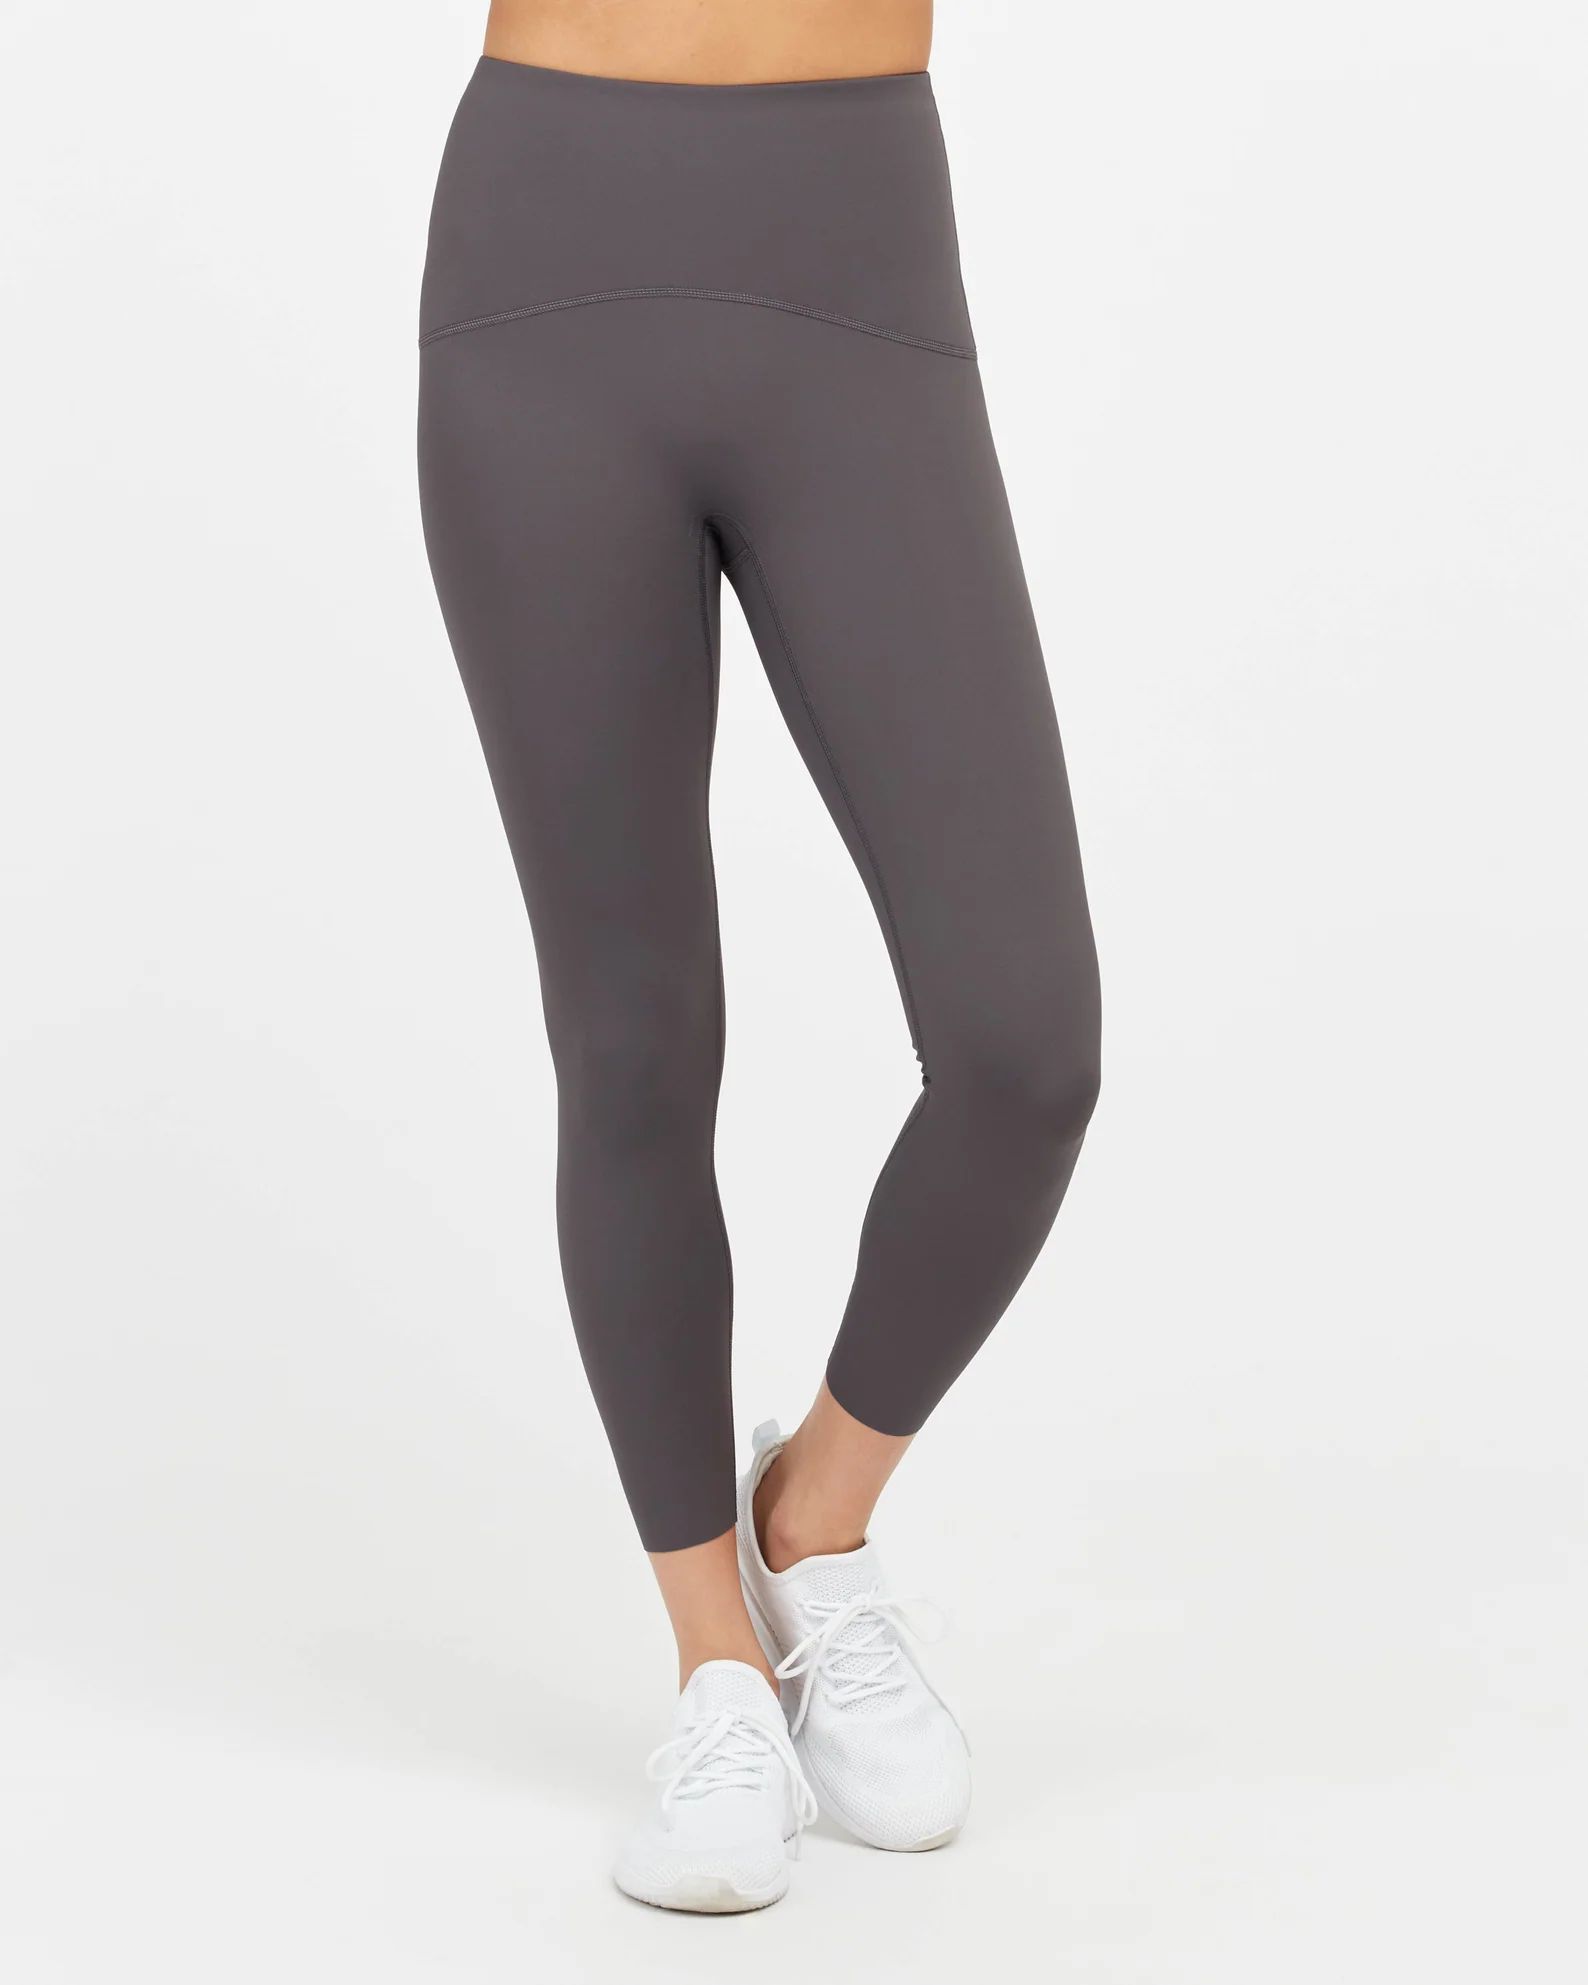 Booty Boost® Active 7/8 Leggings | Spanx